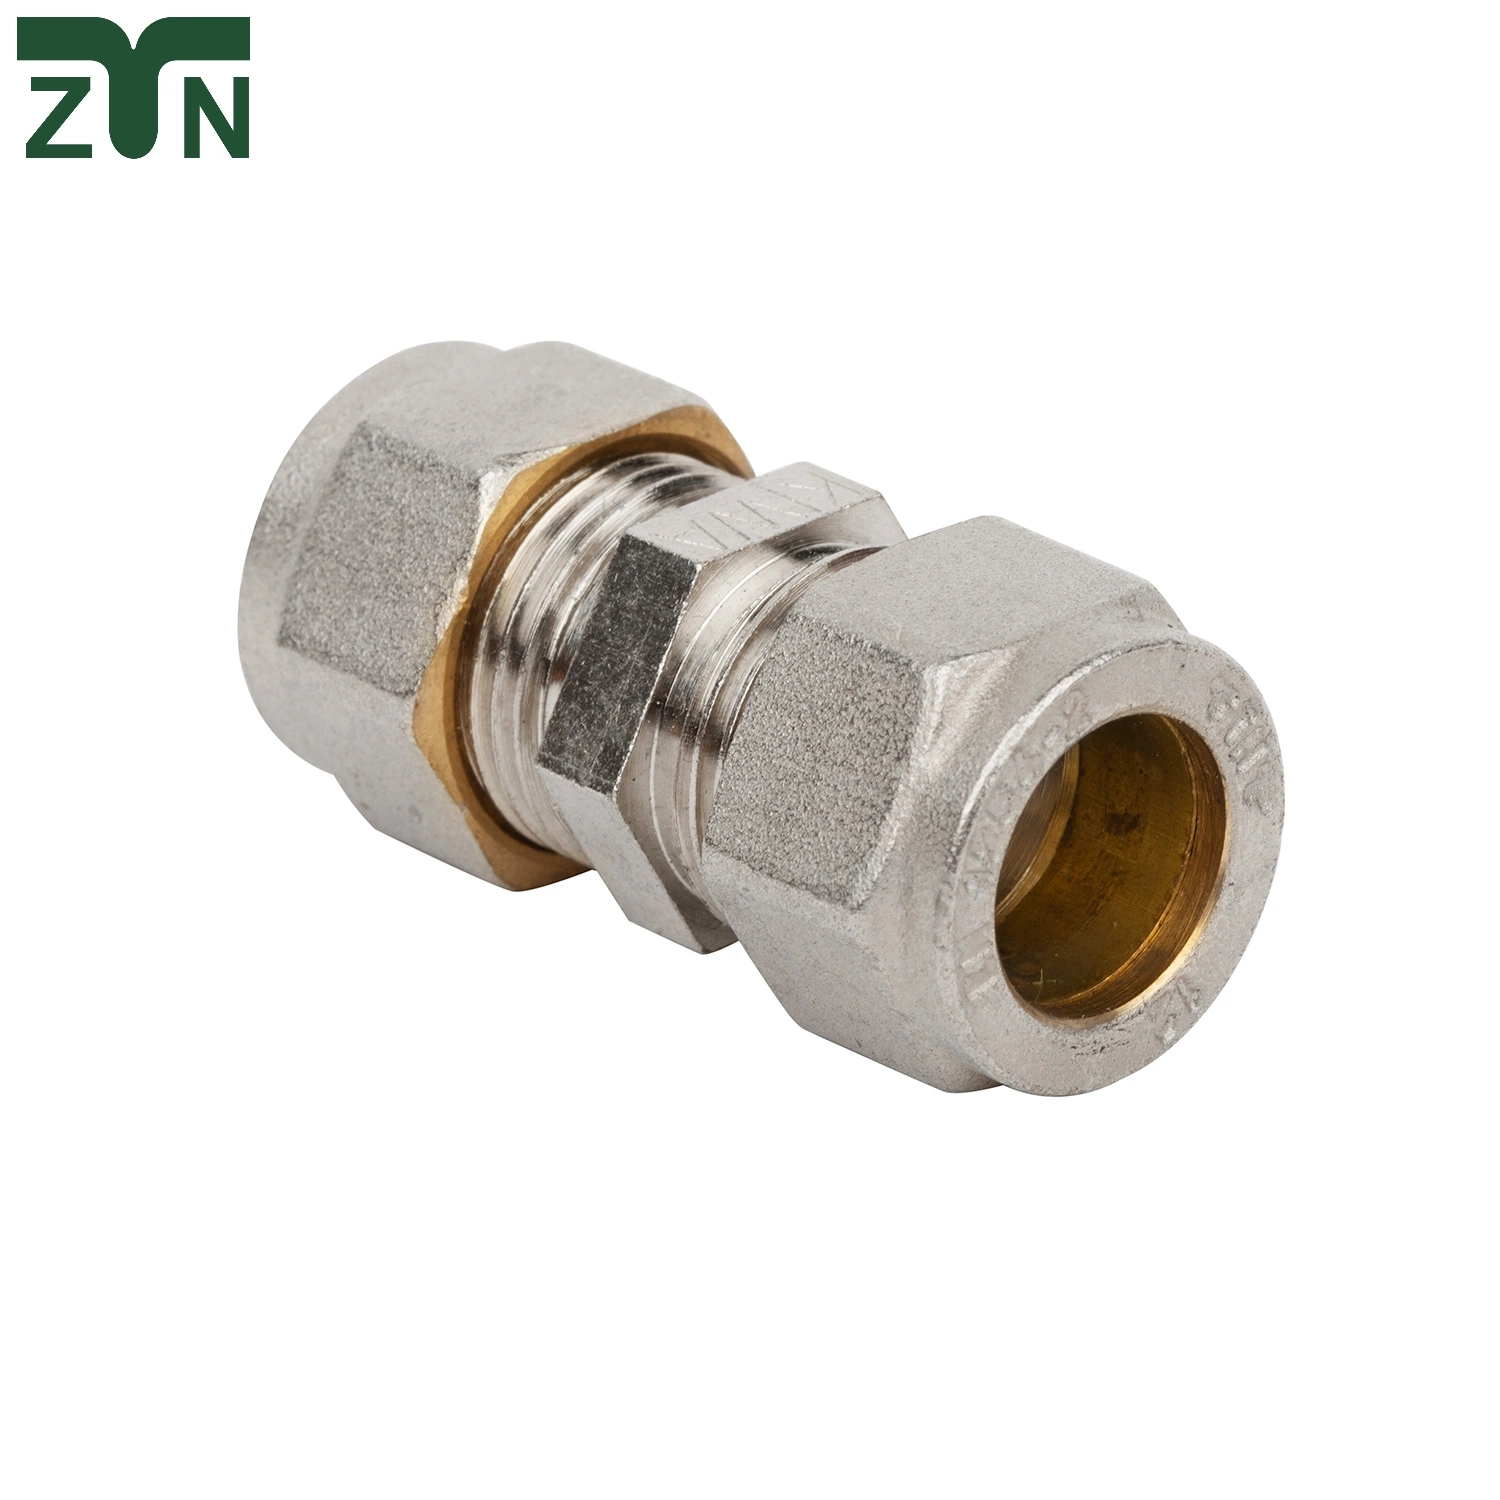 Full Range of Straight Couplings Pipe Fittings Compression Brass Fitting with High quality/High cost performance 